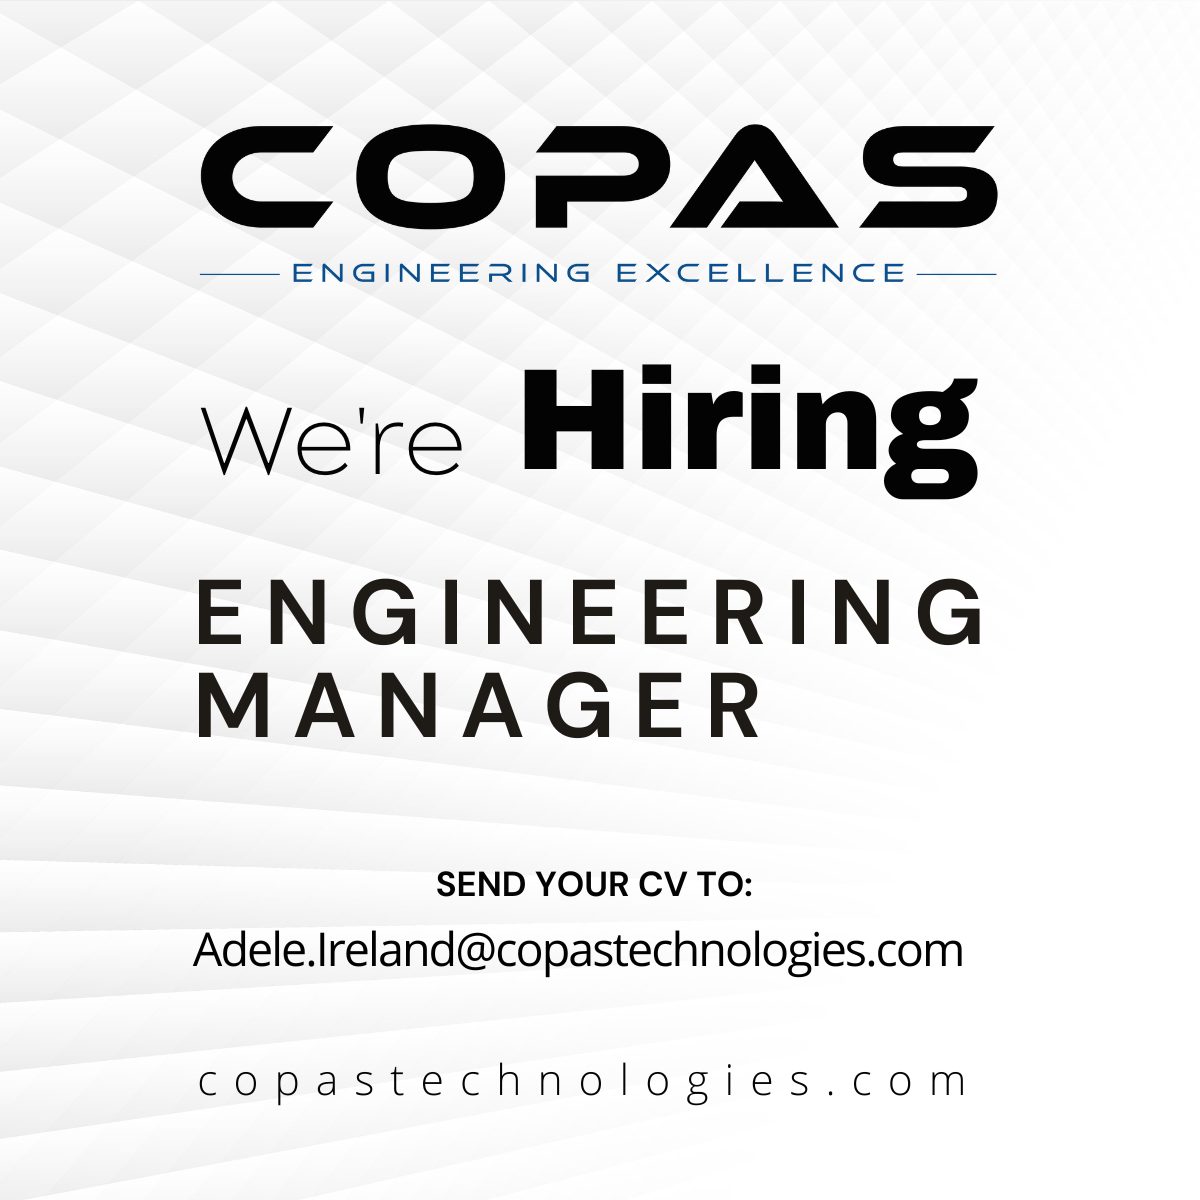 Now hiring - engineering manager